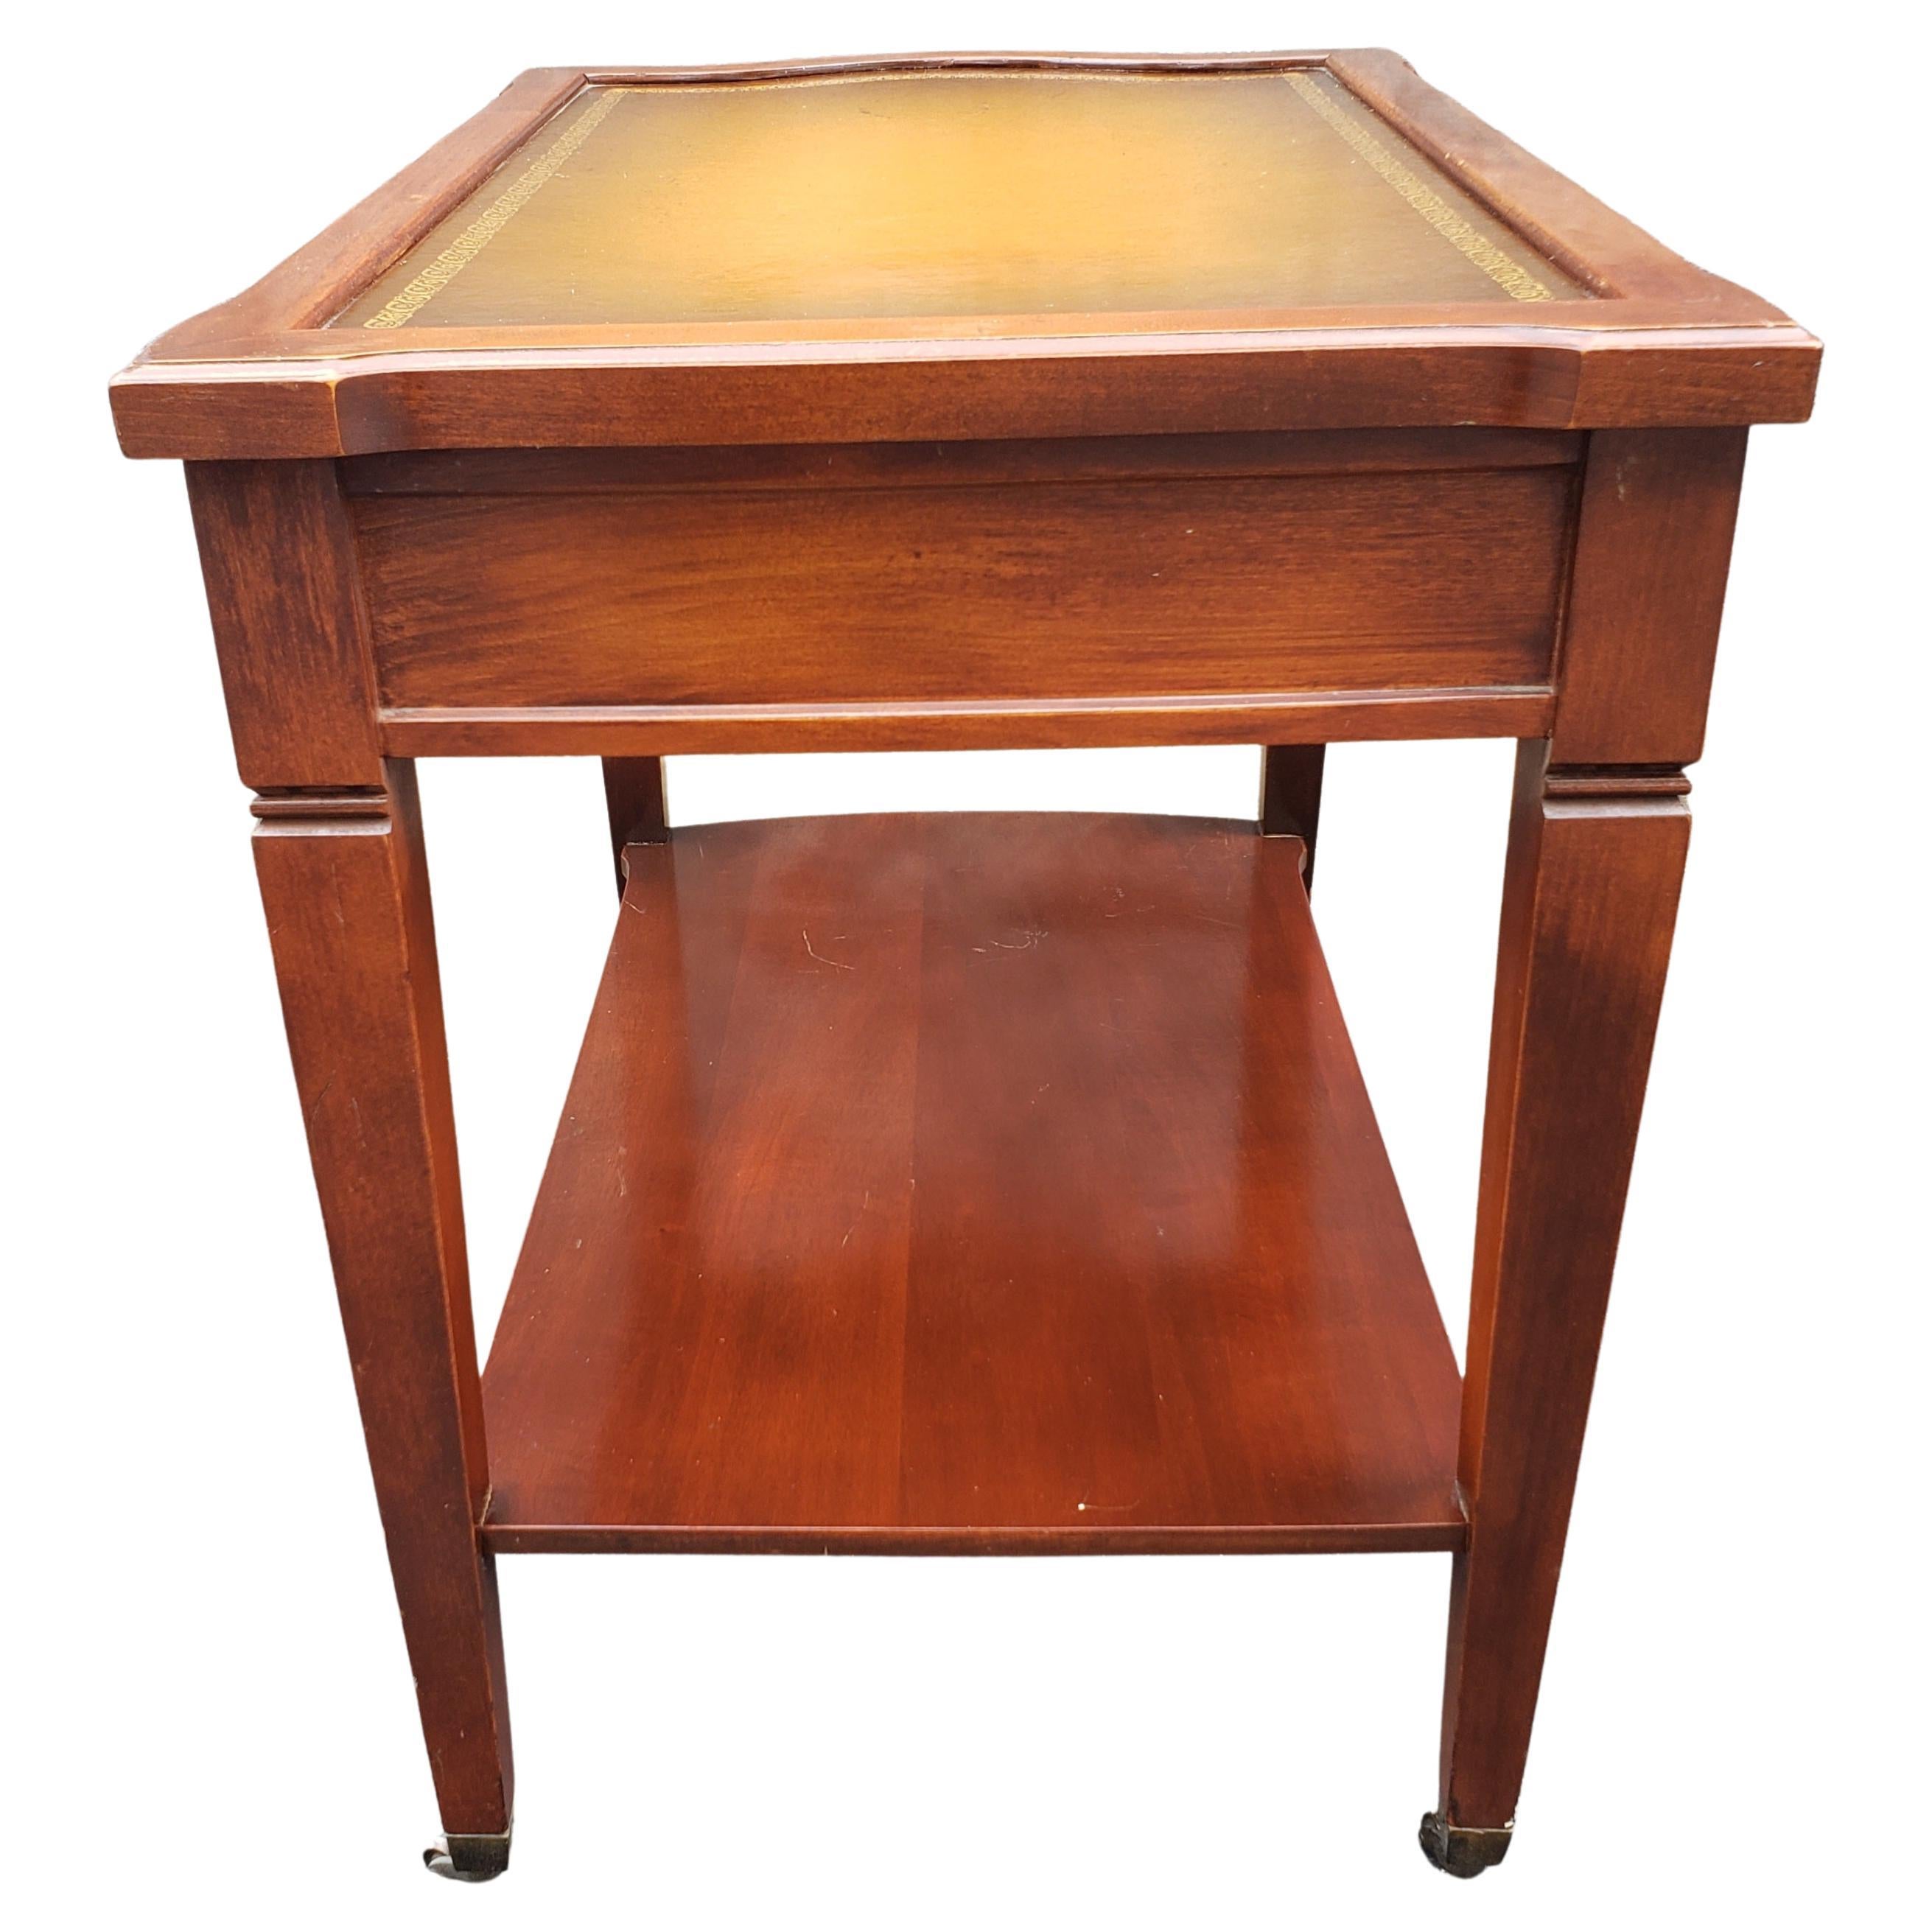 1940's Mersman Two Tier Mahogany Tooled Leather Stenciled Top Side Tables Bon état à Germantown, MD